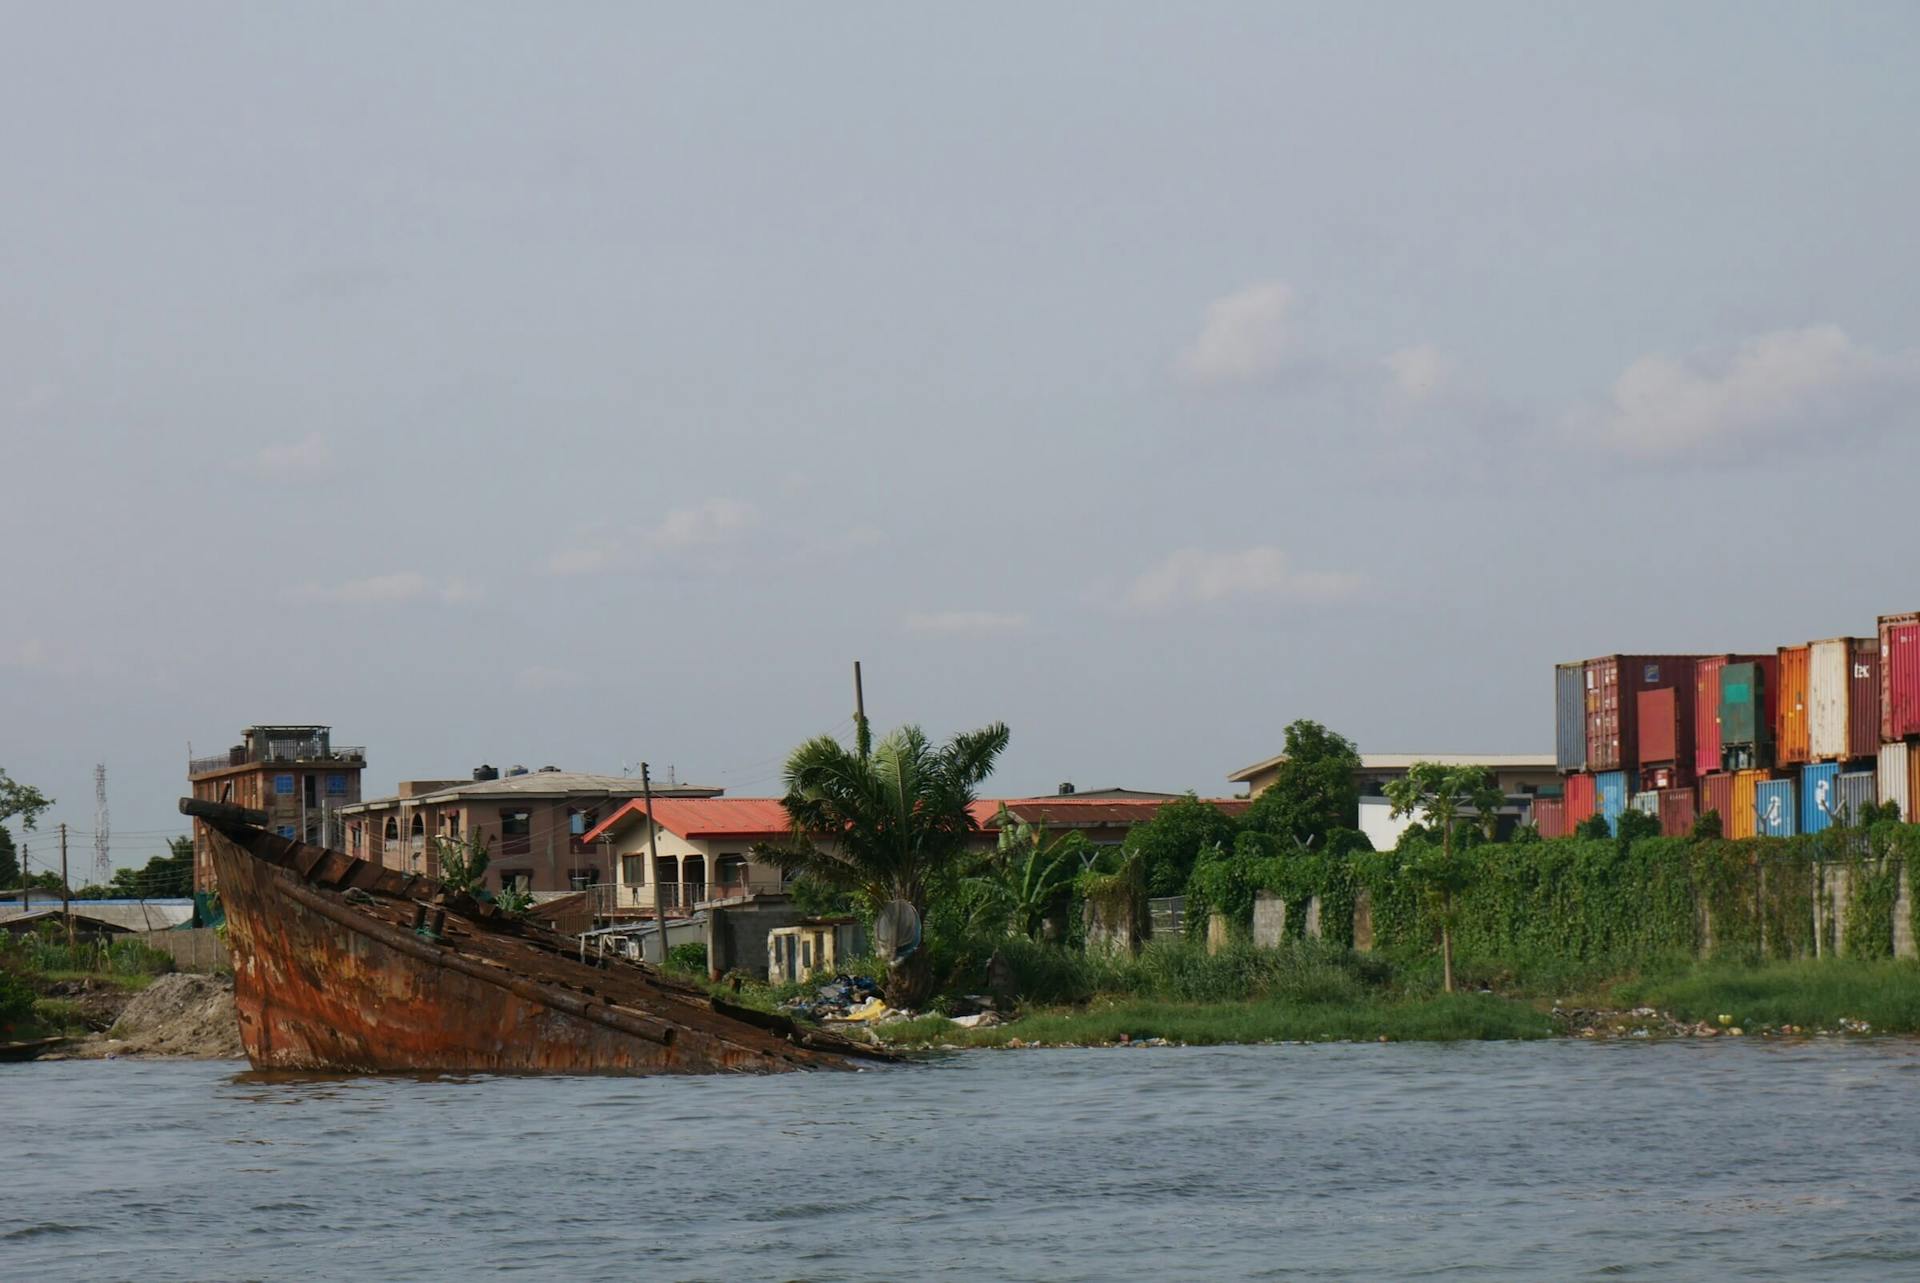 Shipwreck and shipping containers, Apapa Lagos. Foto door Dele Adeyemo. 